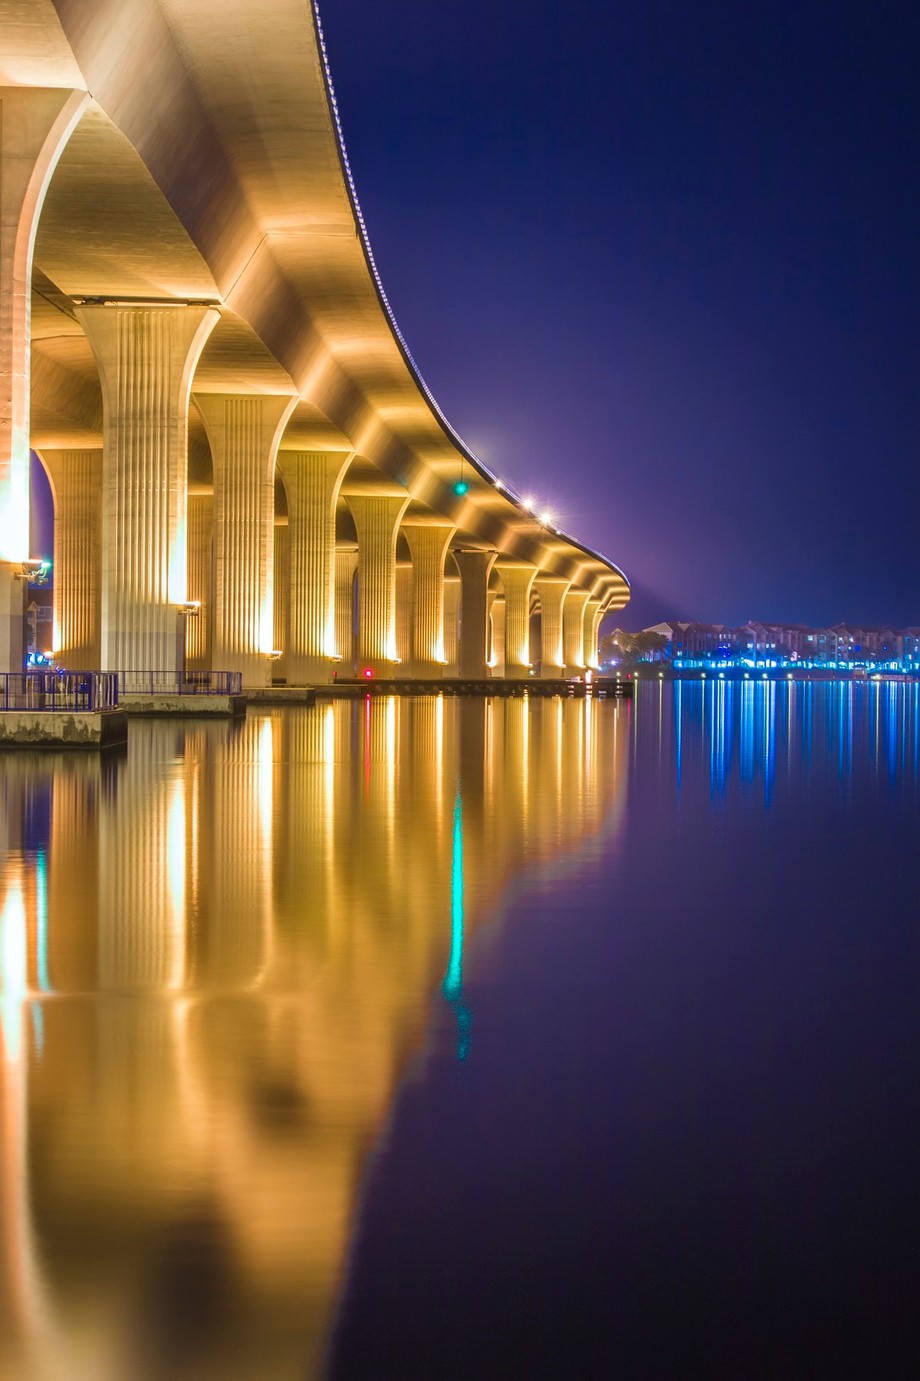 Roosevelt Bridge Reflection Portrait by jpfotos - Playing With Light Photo Contest